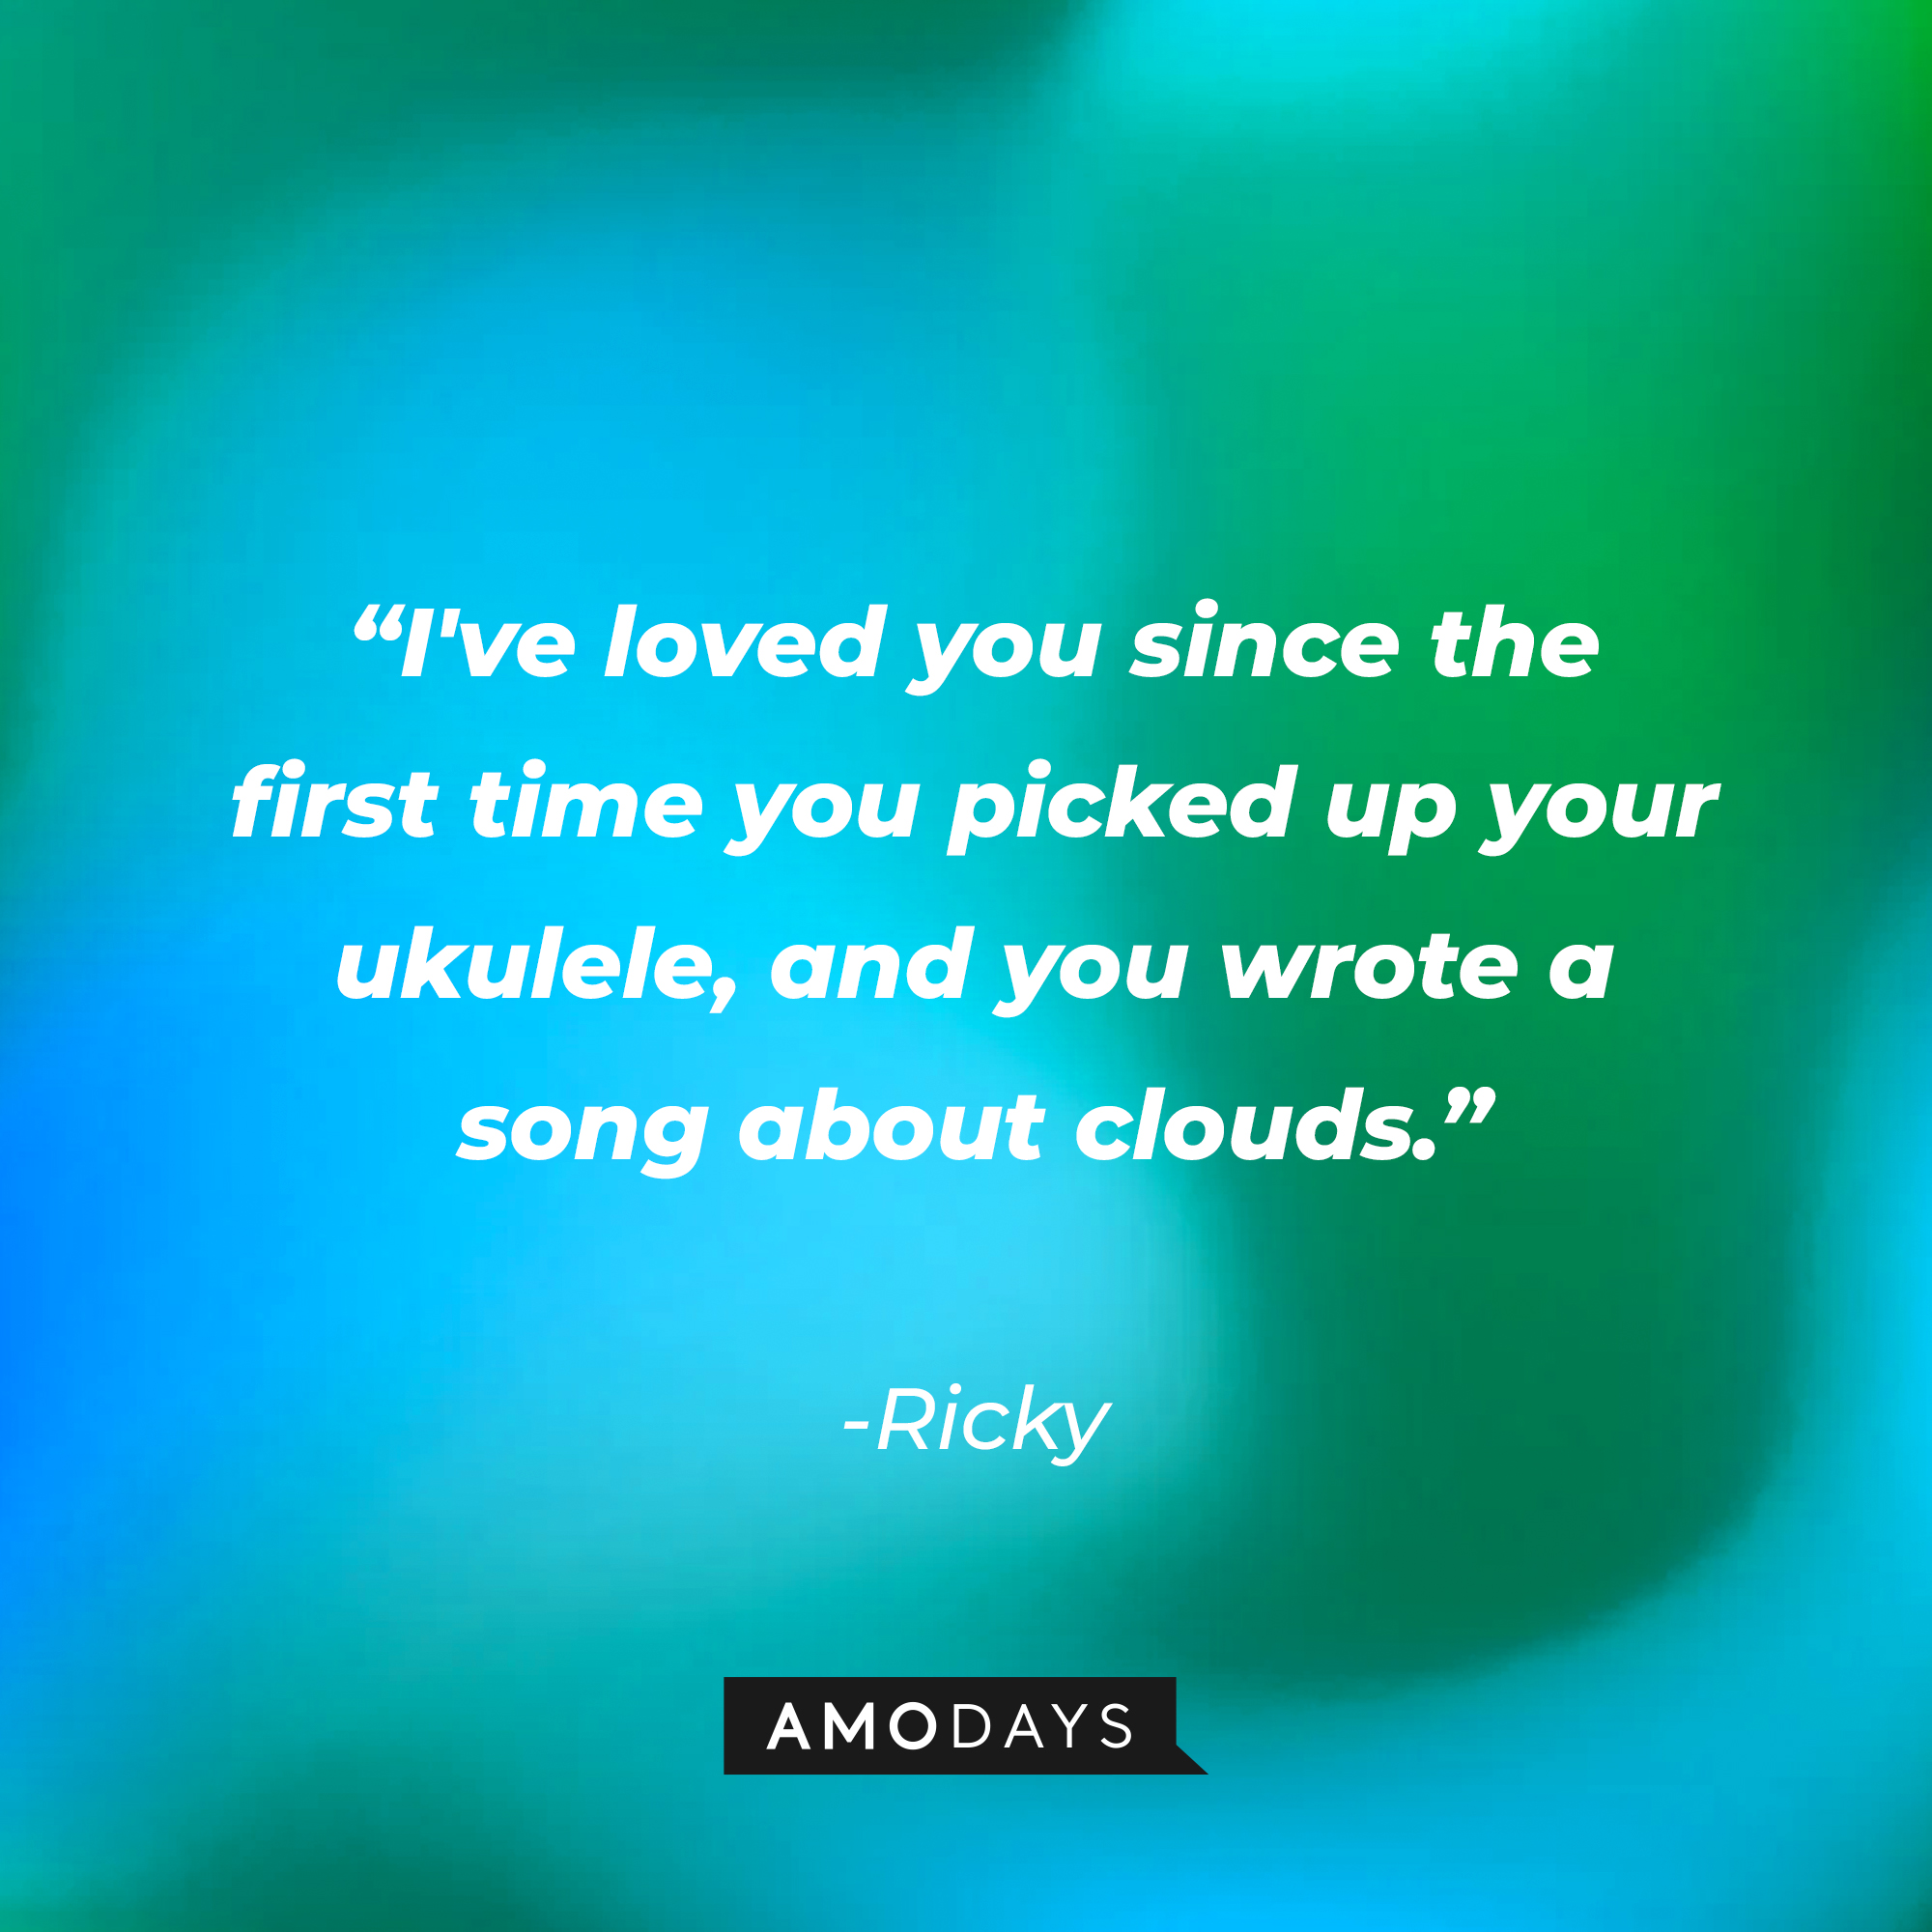 Ricky’s quote: “I've loved you since the first time you picked up your ukulele and you wrote a song about clouds." | Source: AmoDays